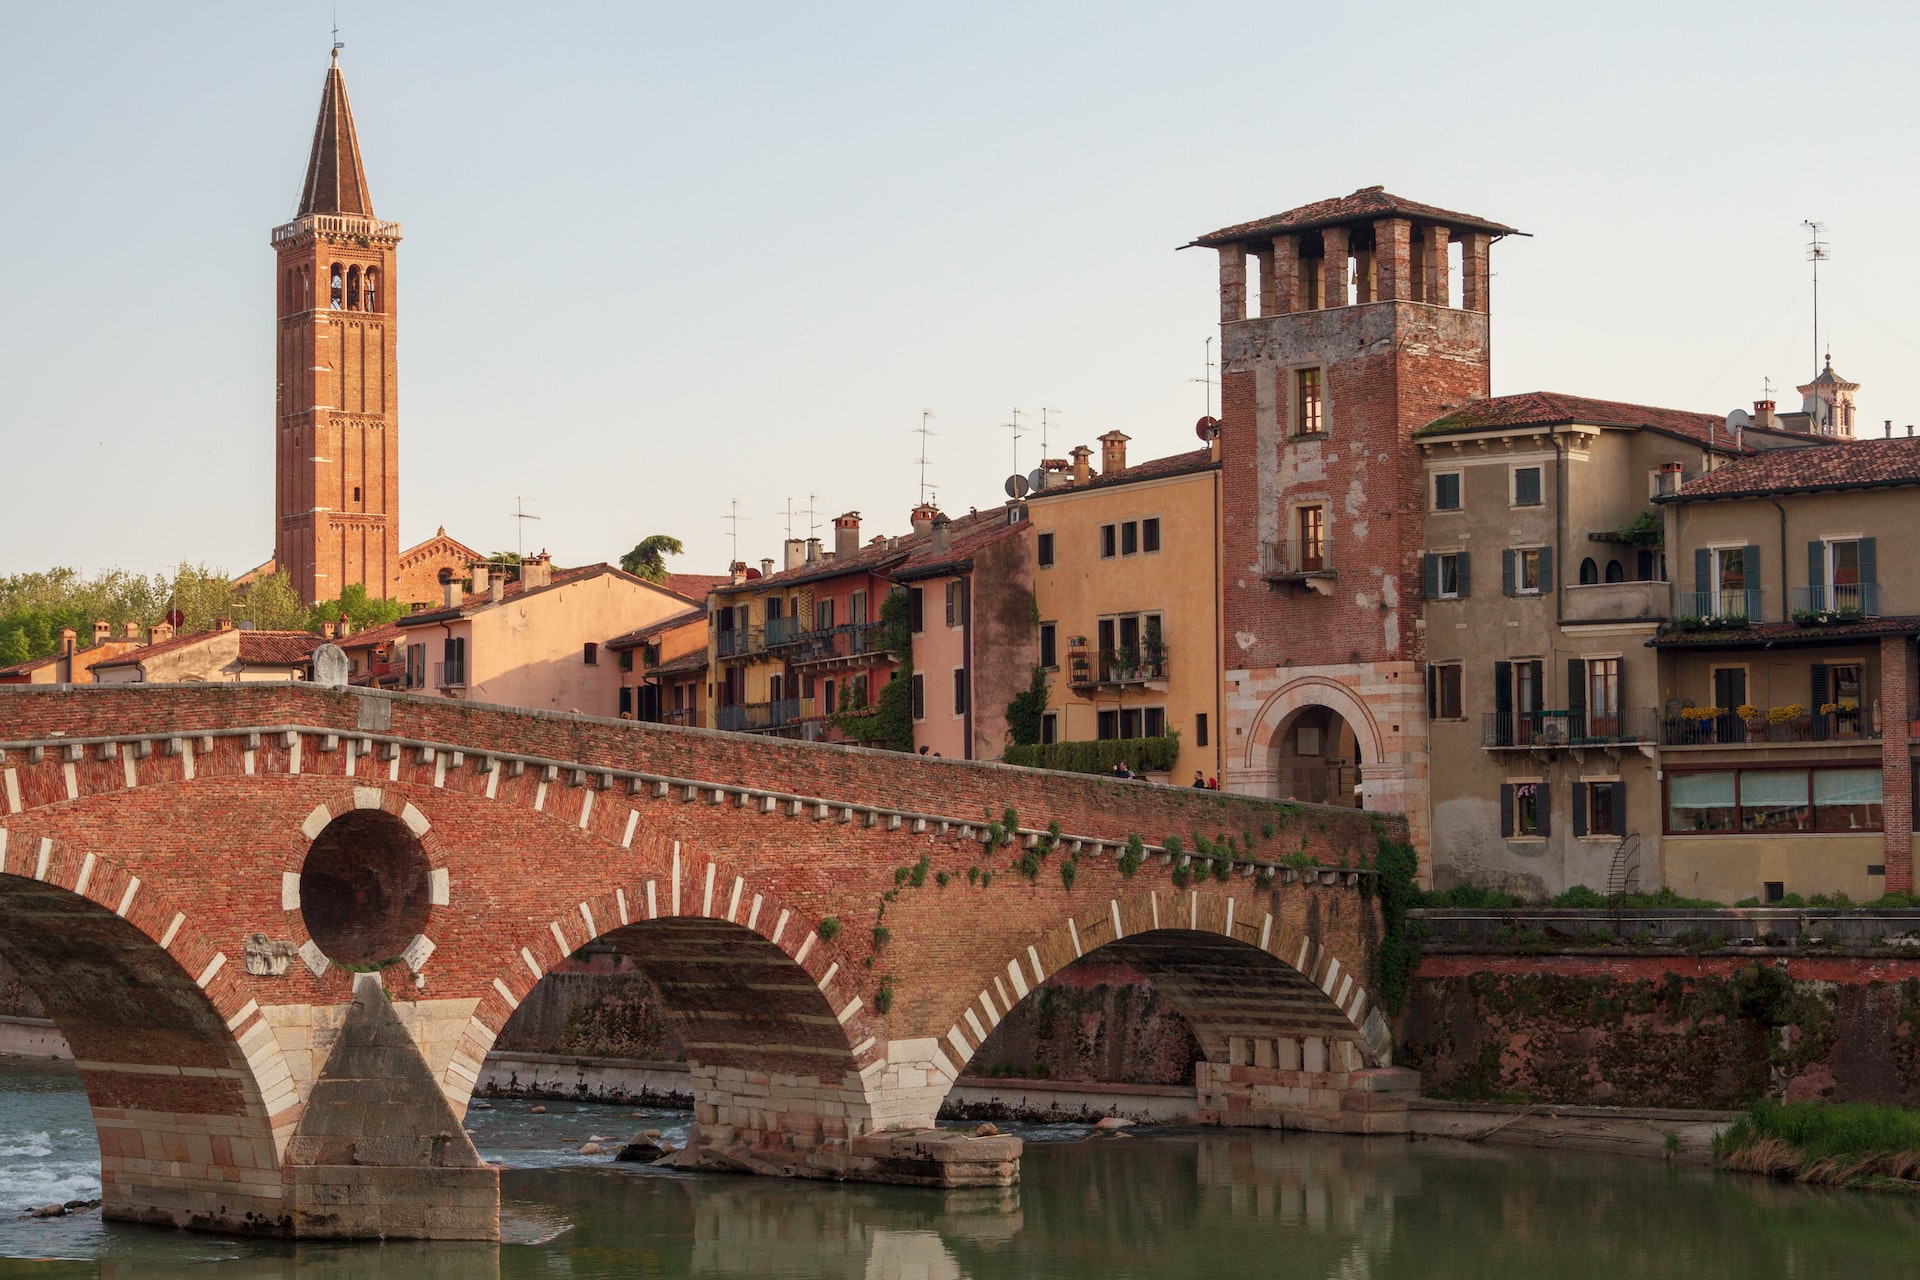 Verona is a romantic city and one of the best cities in Italy
